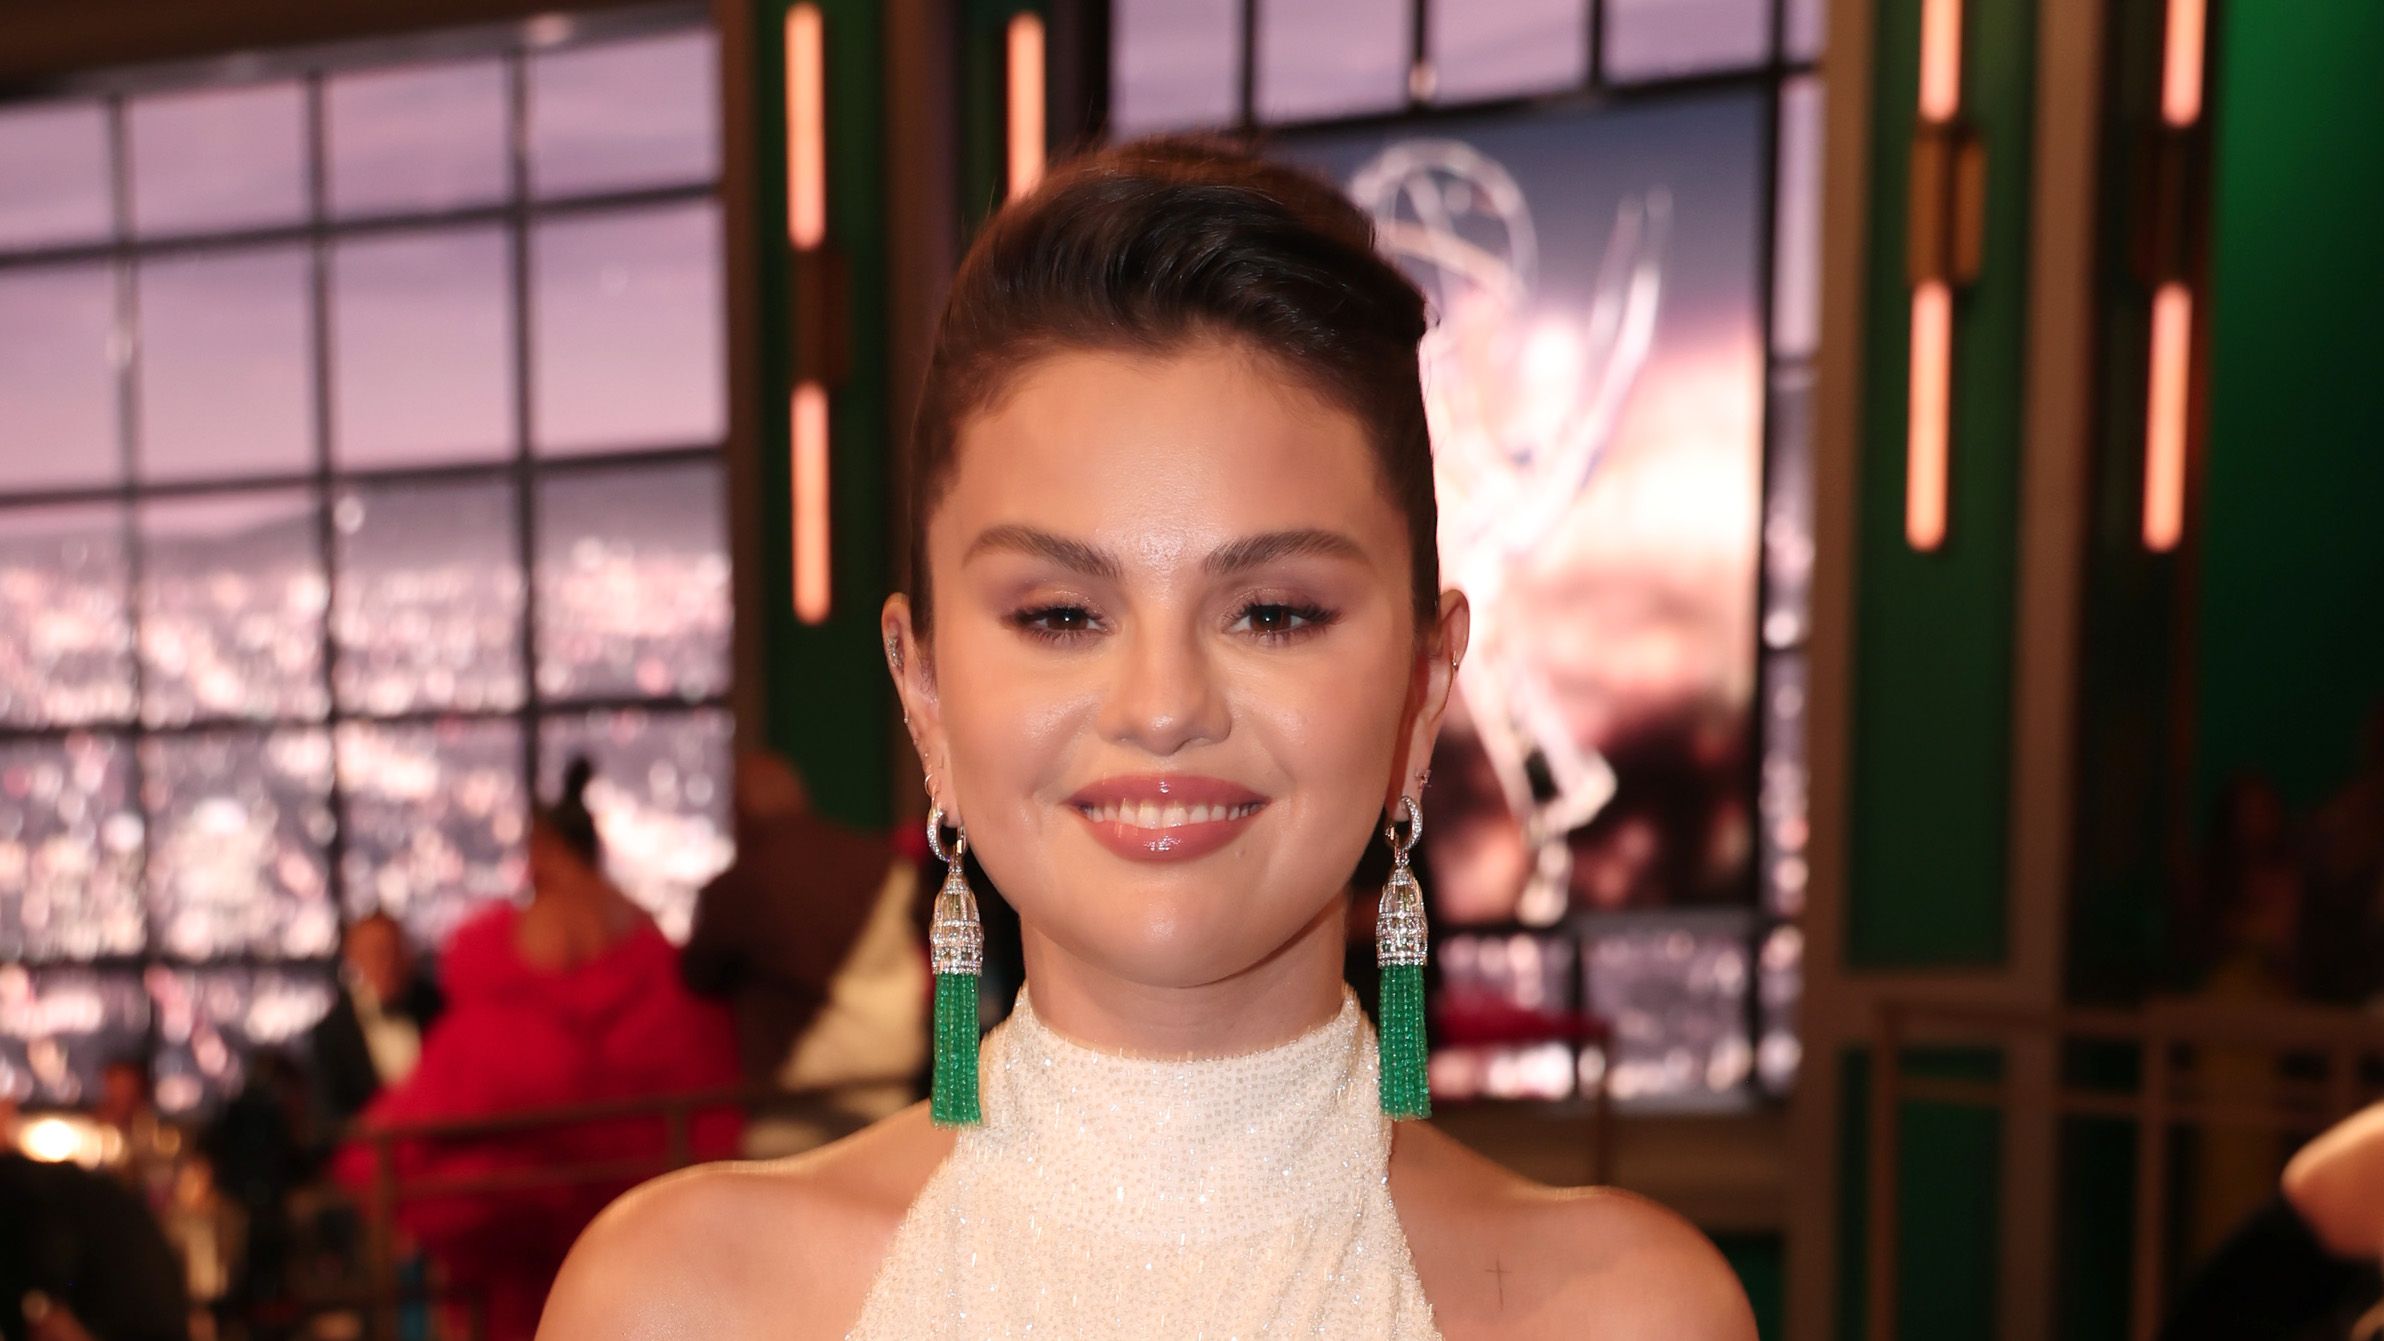 selena gomez coloring pages 2022